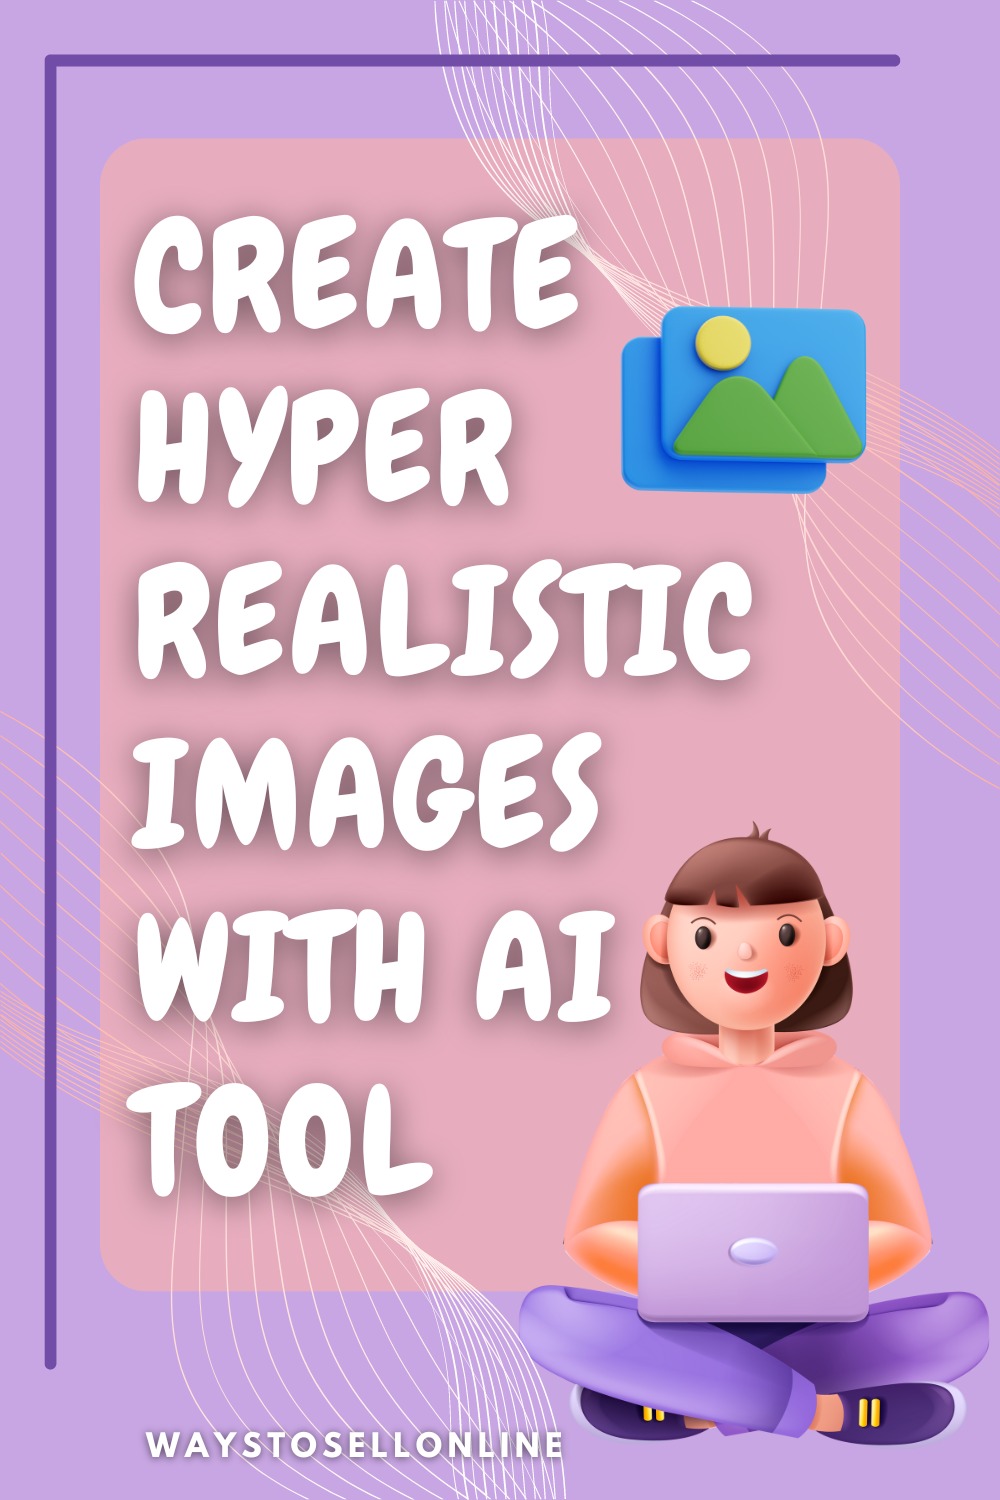 HOW TO CREATE HYPER REALISTIC IMAGES WITH AI TOOL